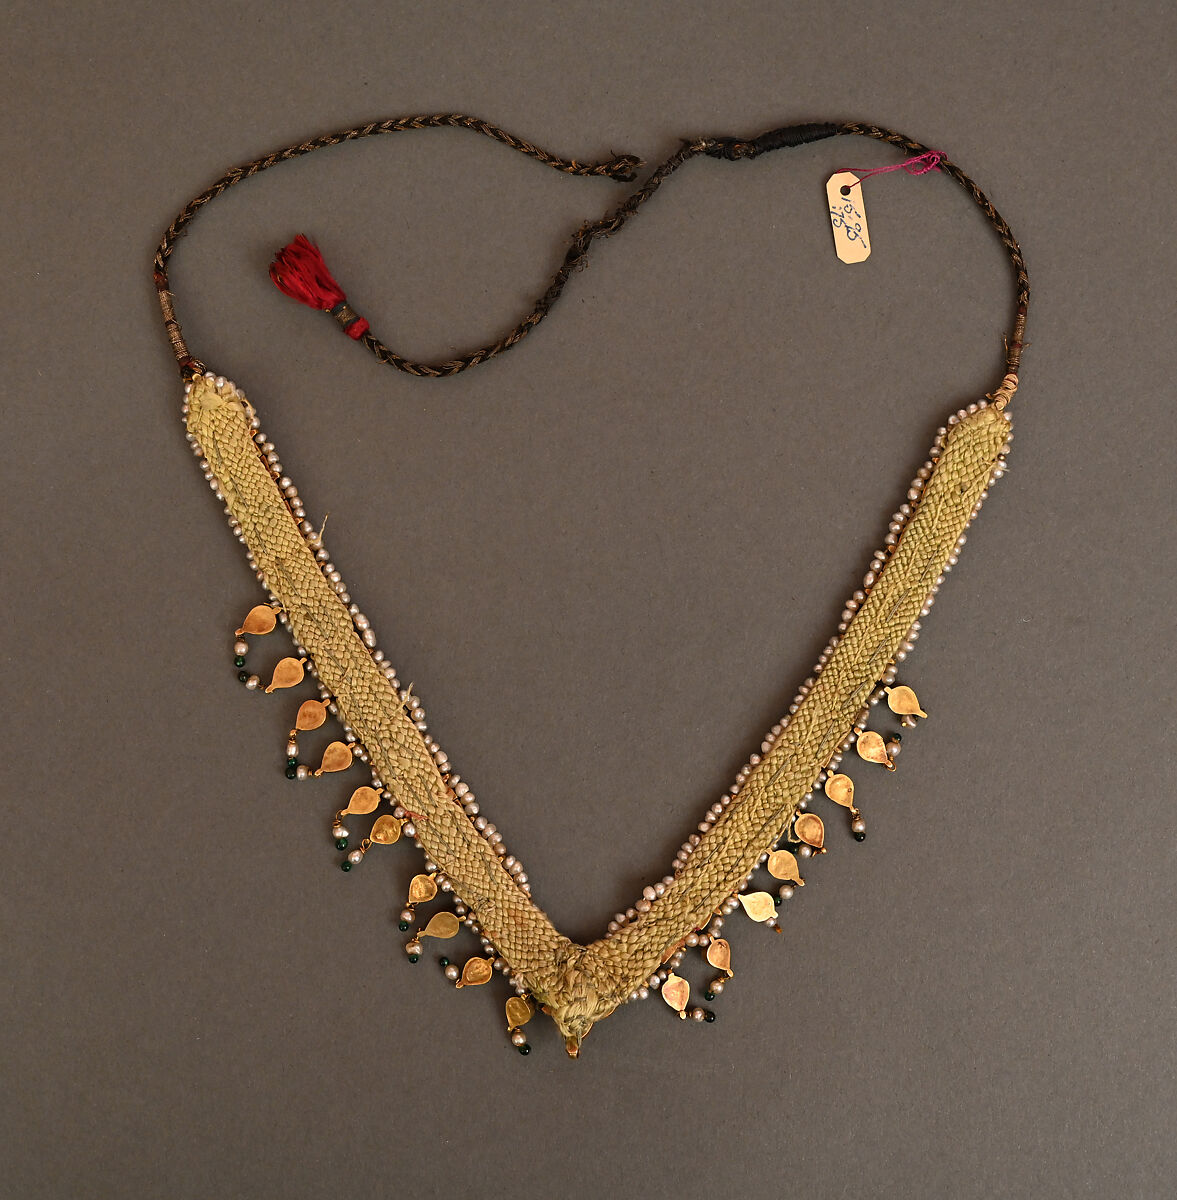 Necklace, Gold set with precious stones, pearls, and glass; enamel work 